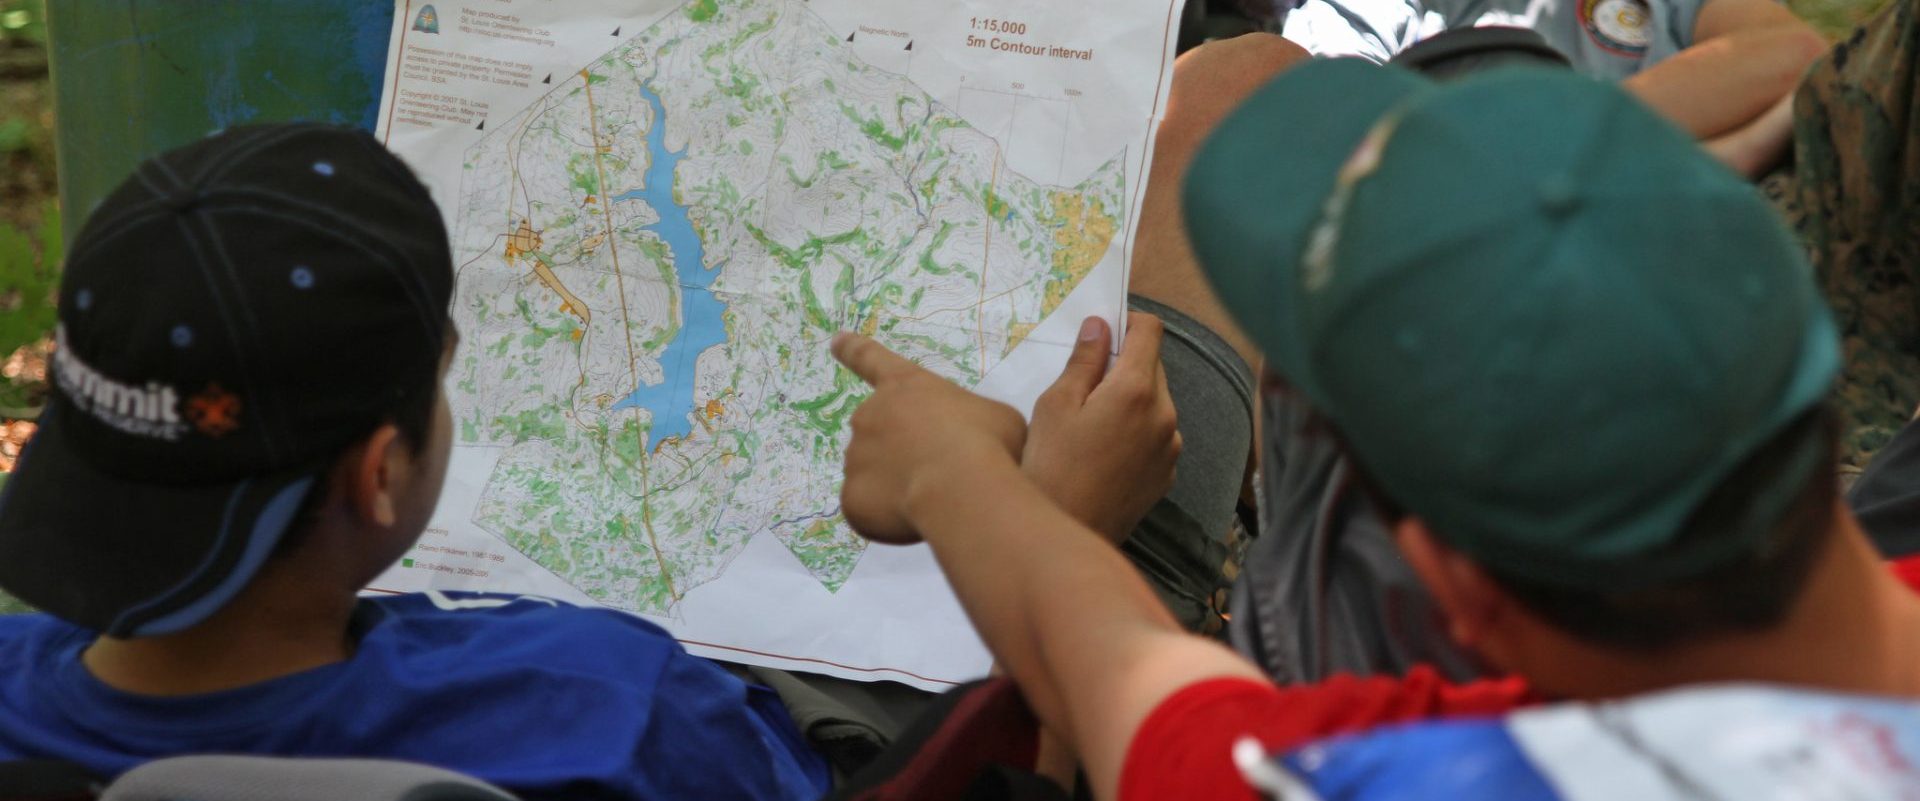 Scouts look at a map